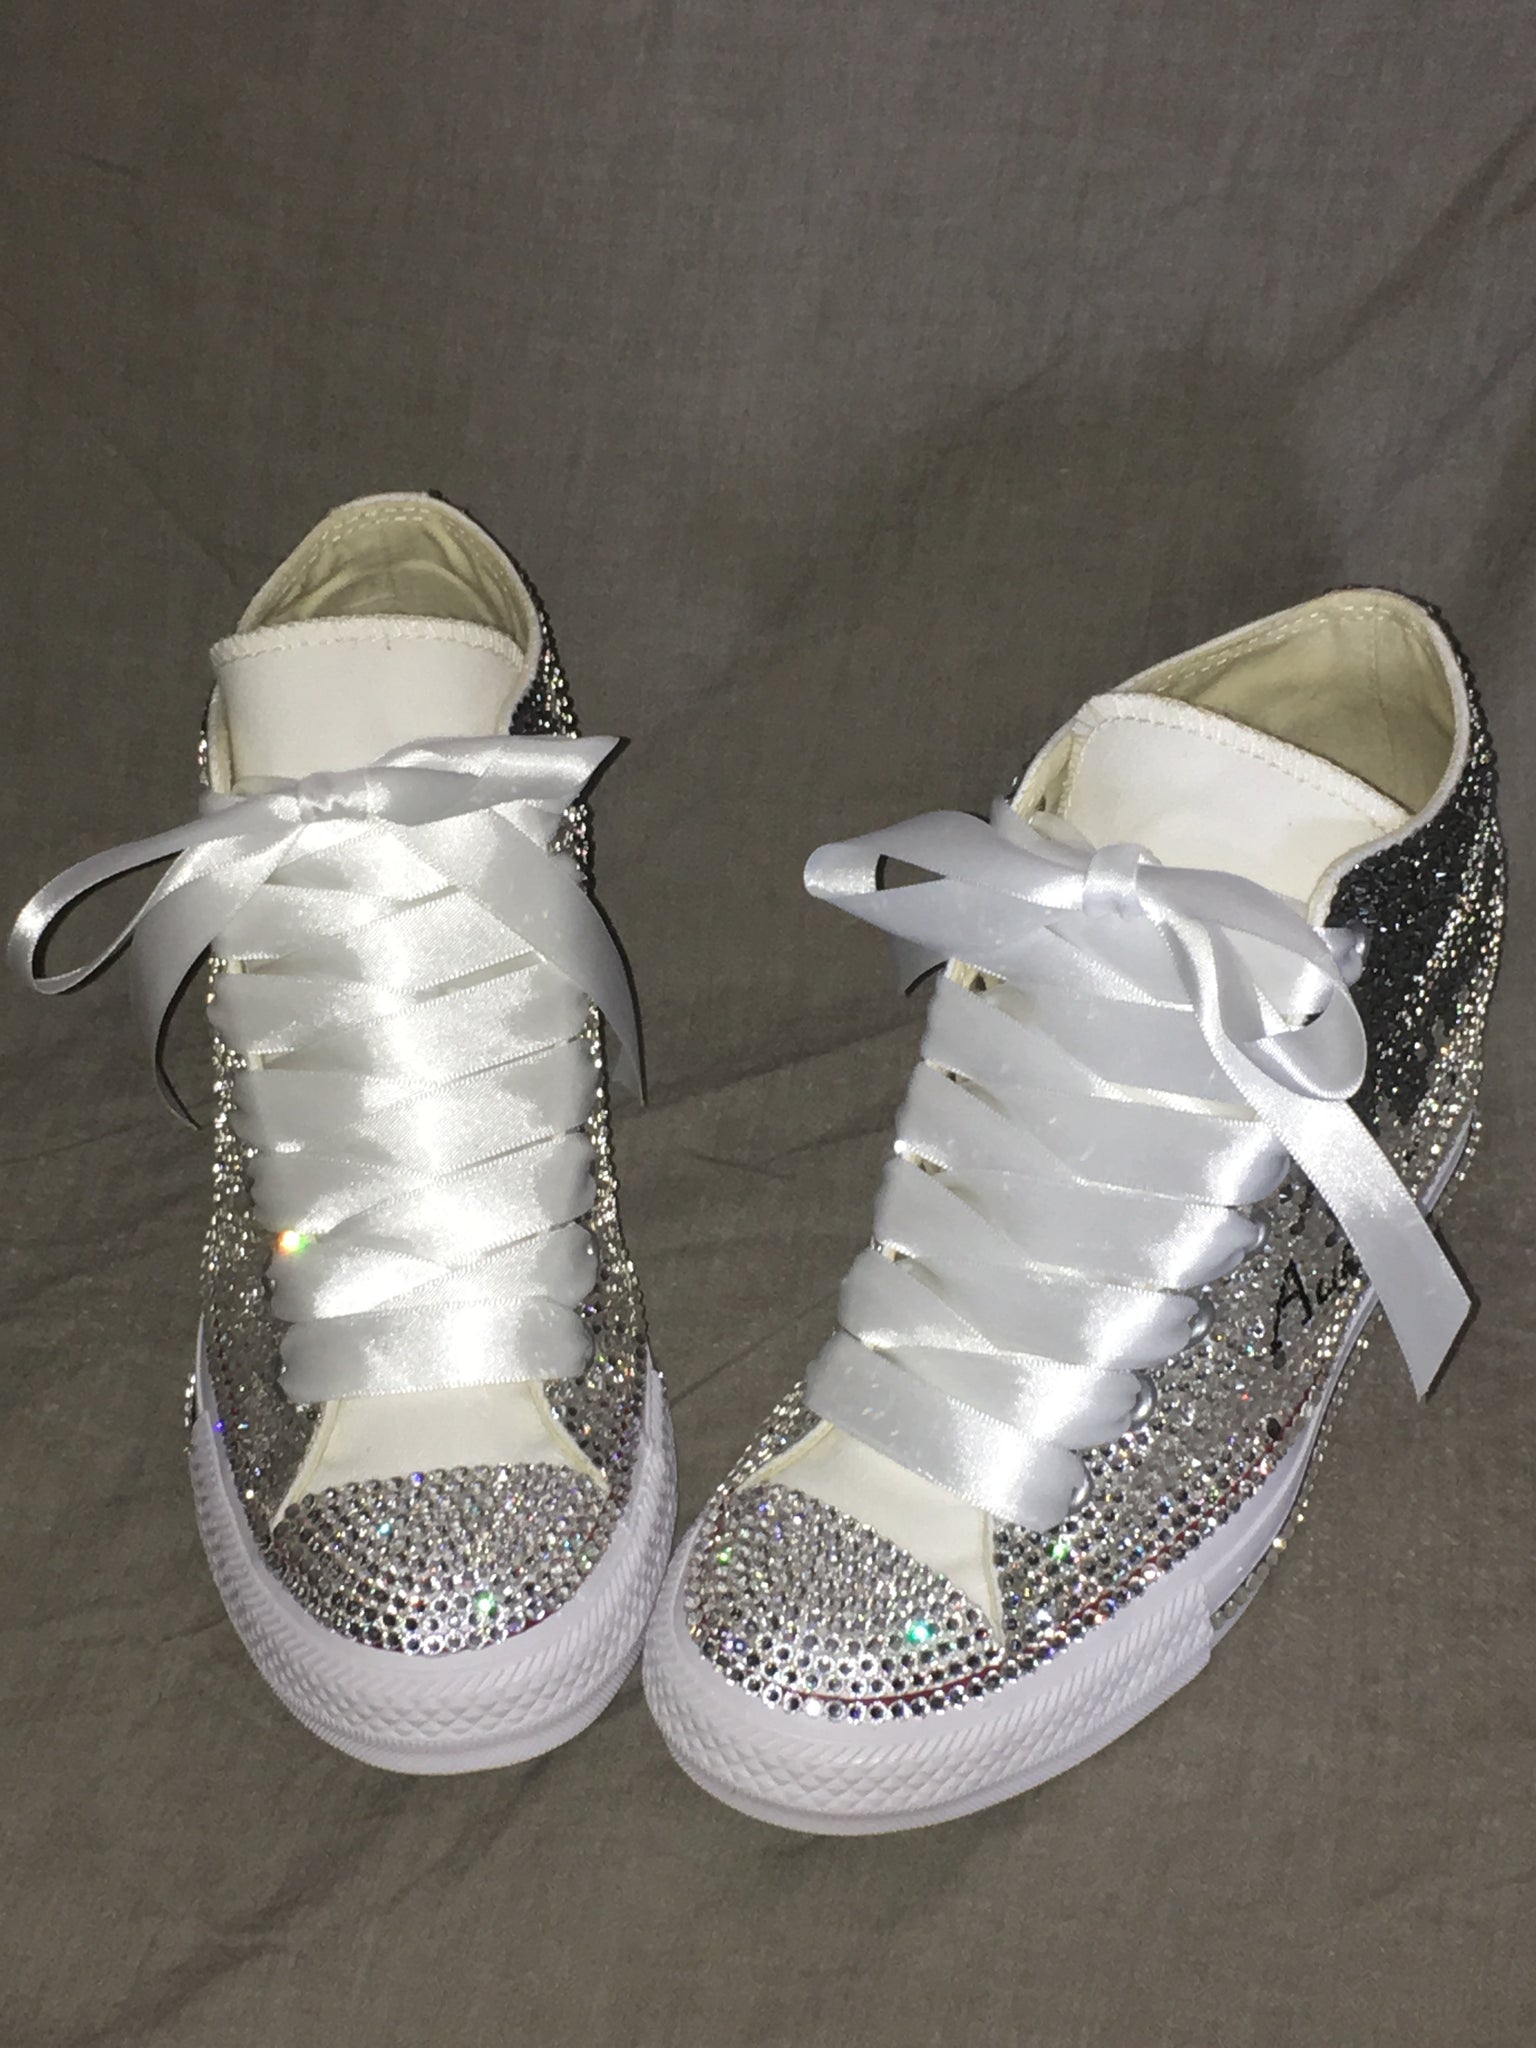 blinged out women's tennis shoes